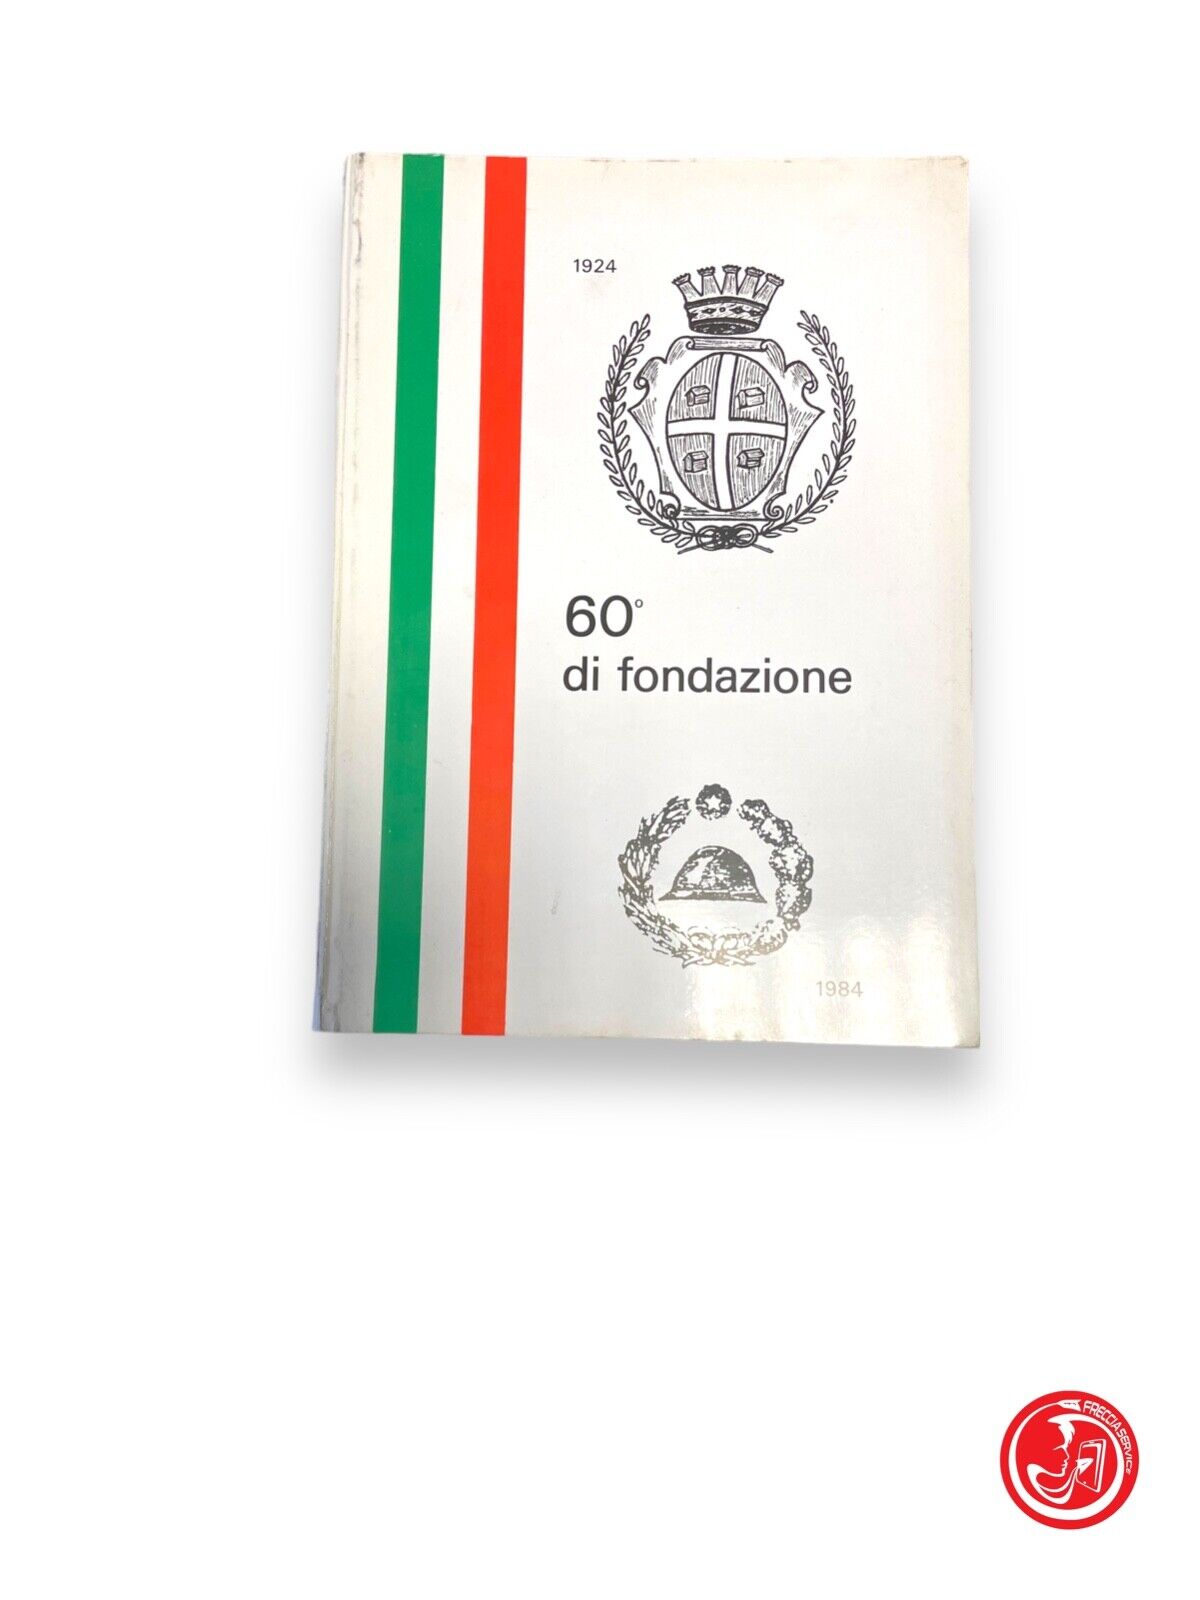 60th anniversary of the foundation of Turin 